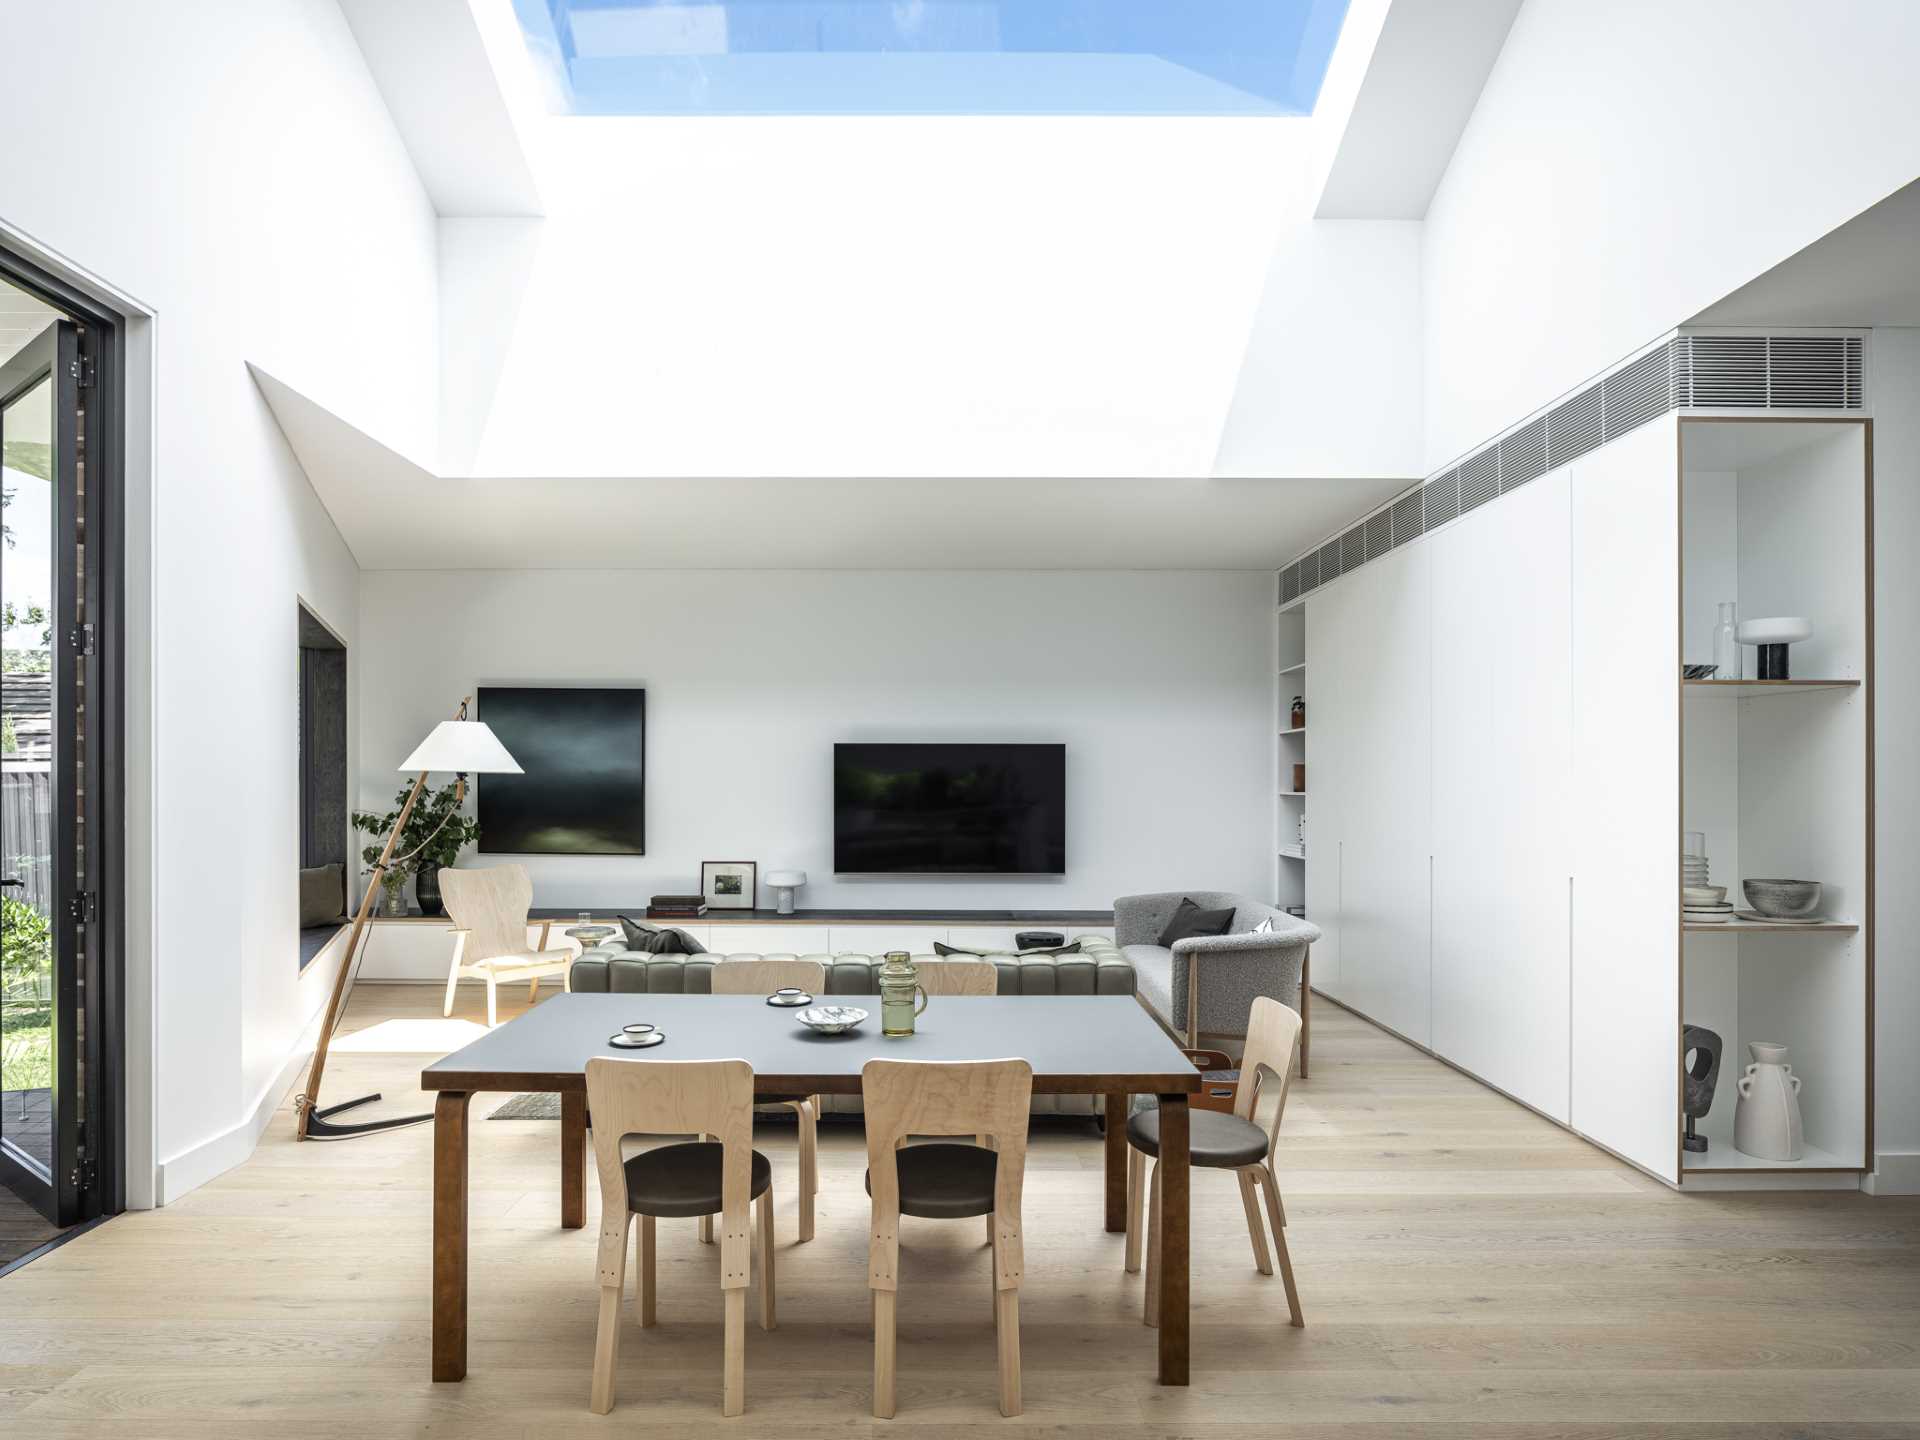 This dining area is located between the living room and the kitchen, and is positioned beneath a large skylight.